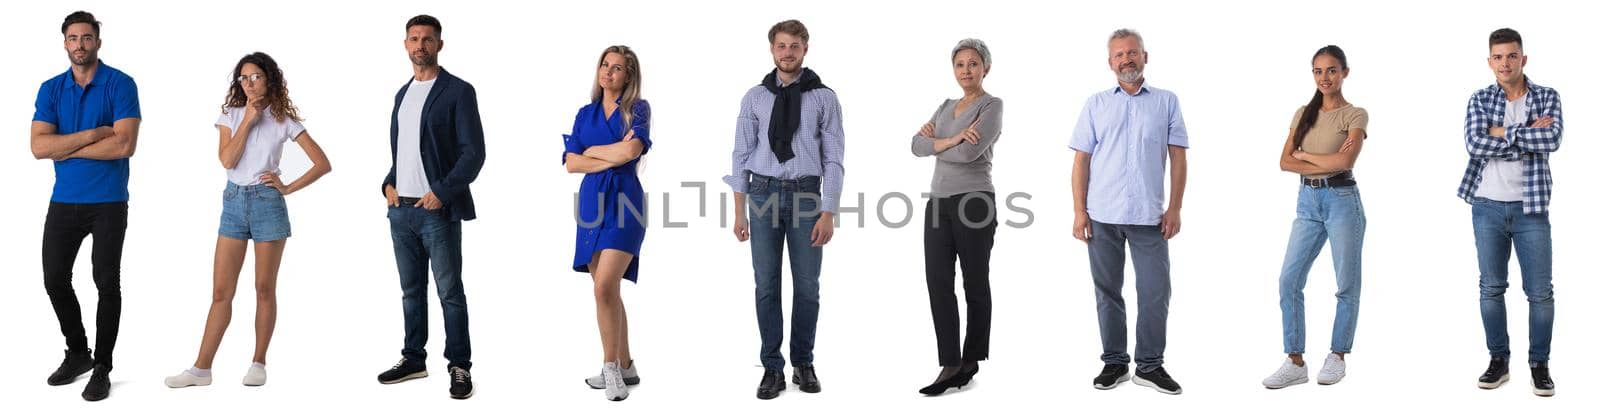 Group of casual people. Isolated on white background.